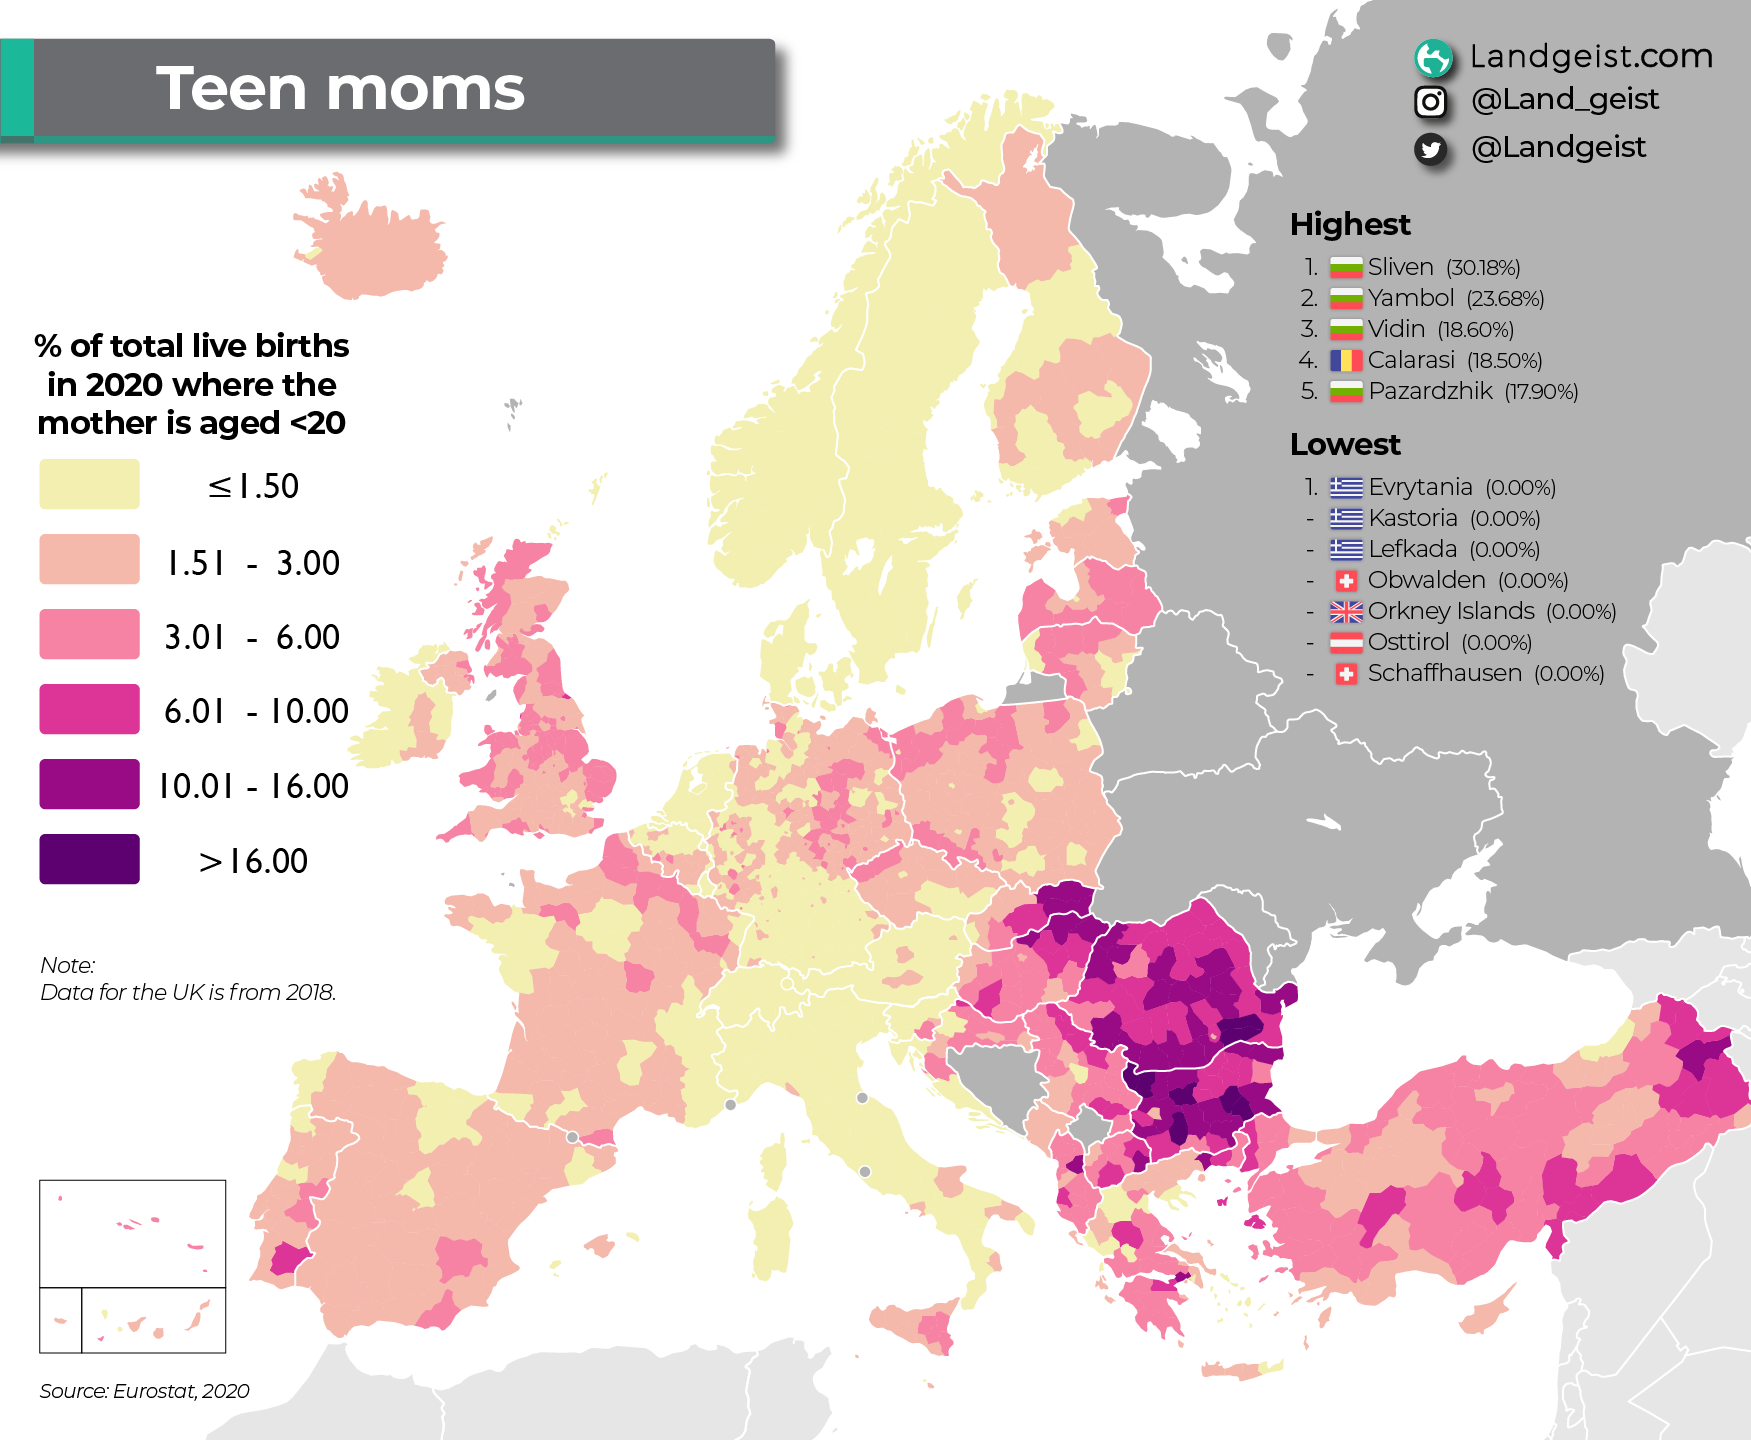 Map of the percentage of teen moms in Europe.